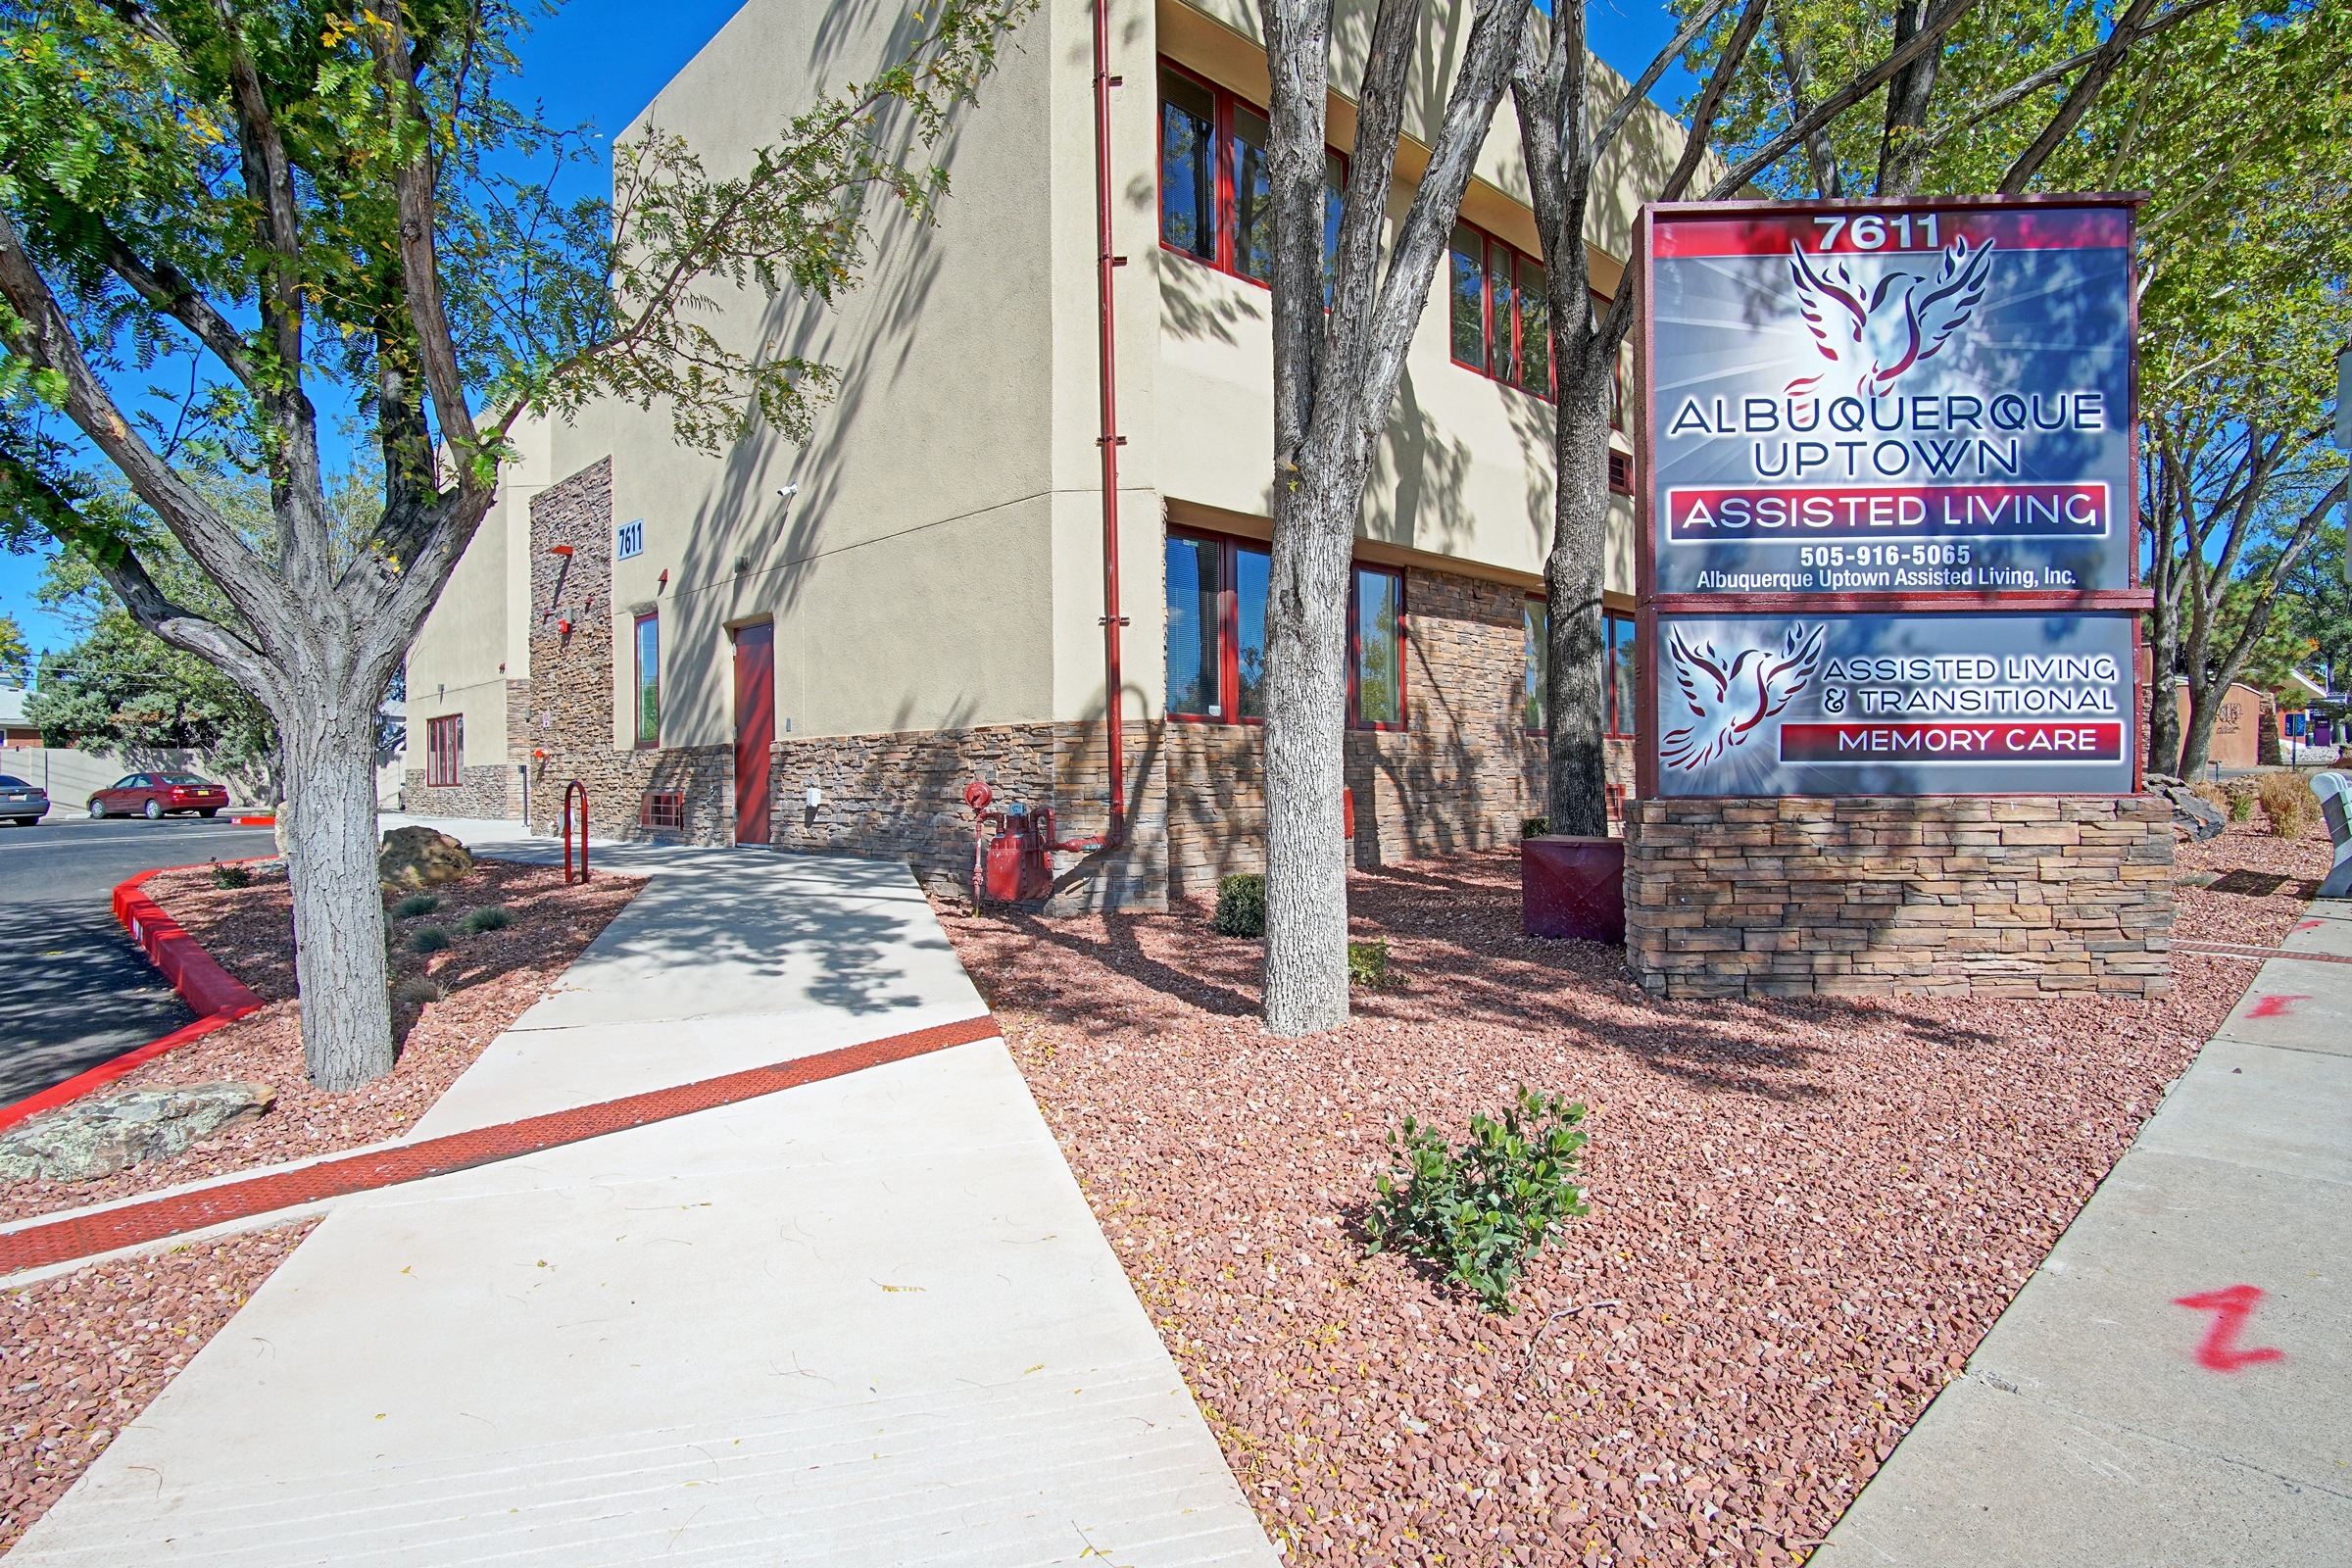 Albuquerque Uptown Assisted Living